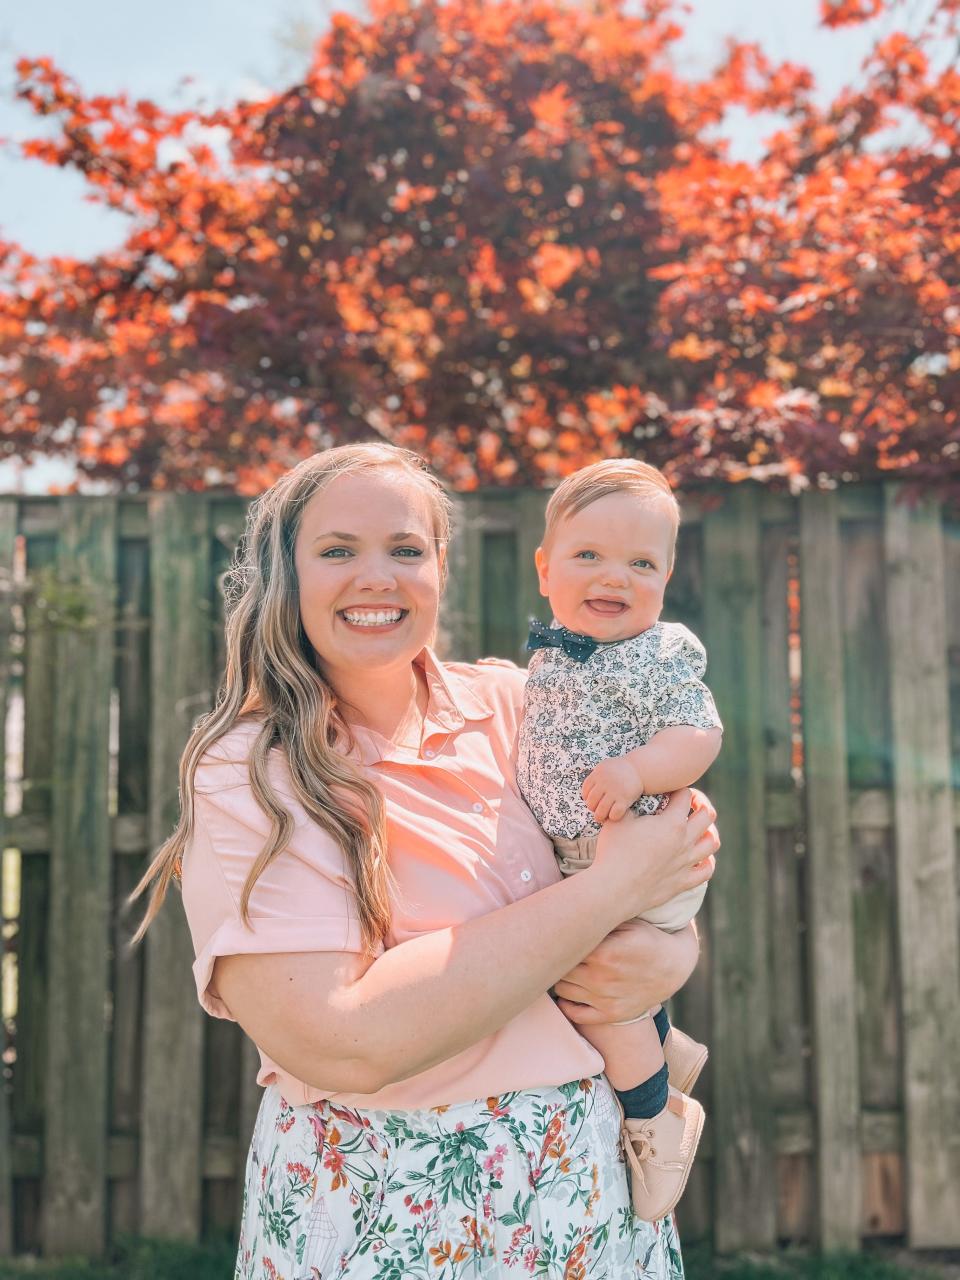 Mallory Young, 29, is switching her 11-month-old to toddler formula. It was the only affordable hypoallergenic option she could find.